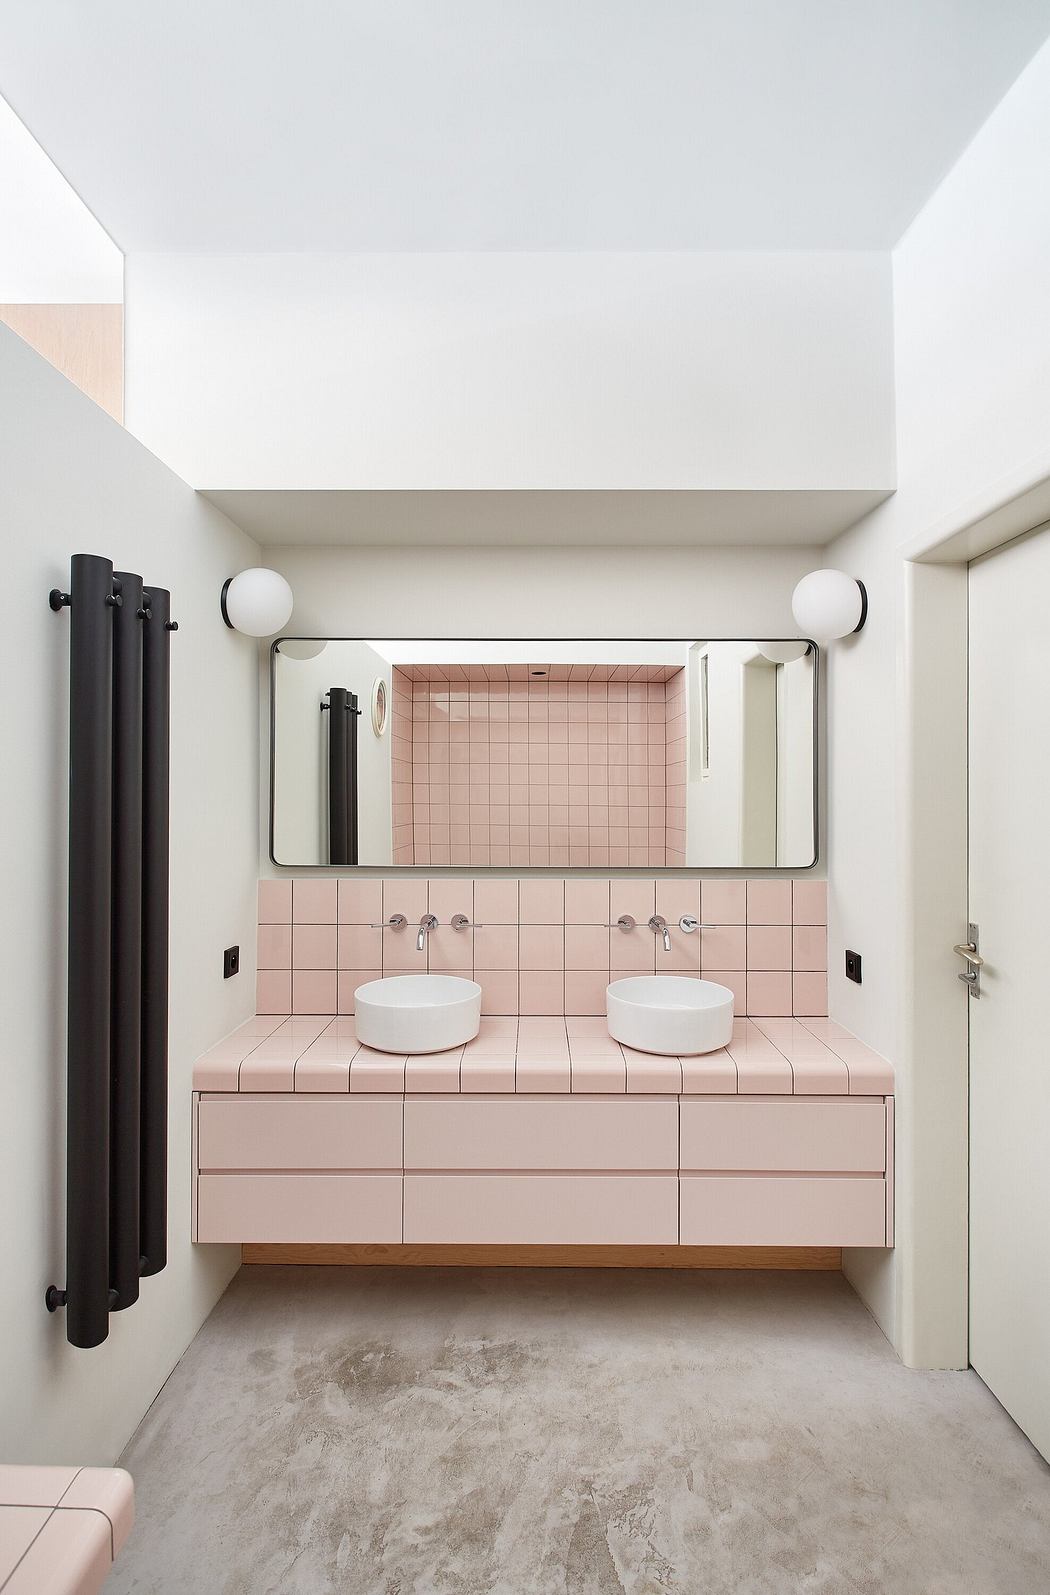 Contemporary pink-tiled bathroom with dual sinks and minimalistic design.